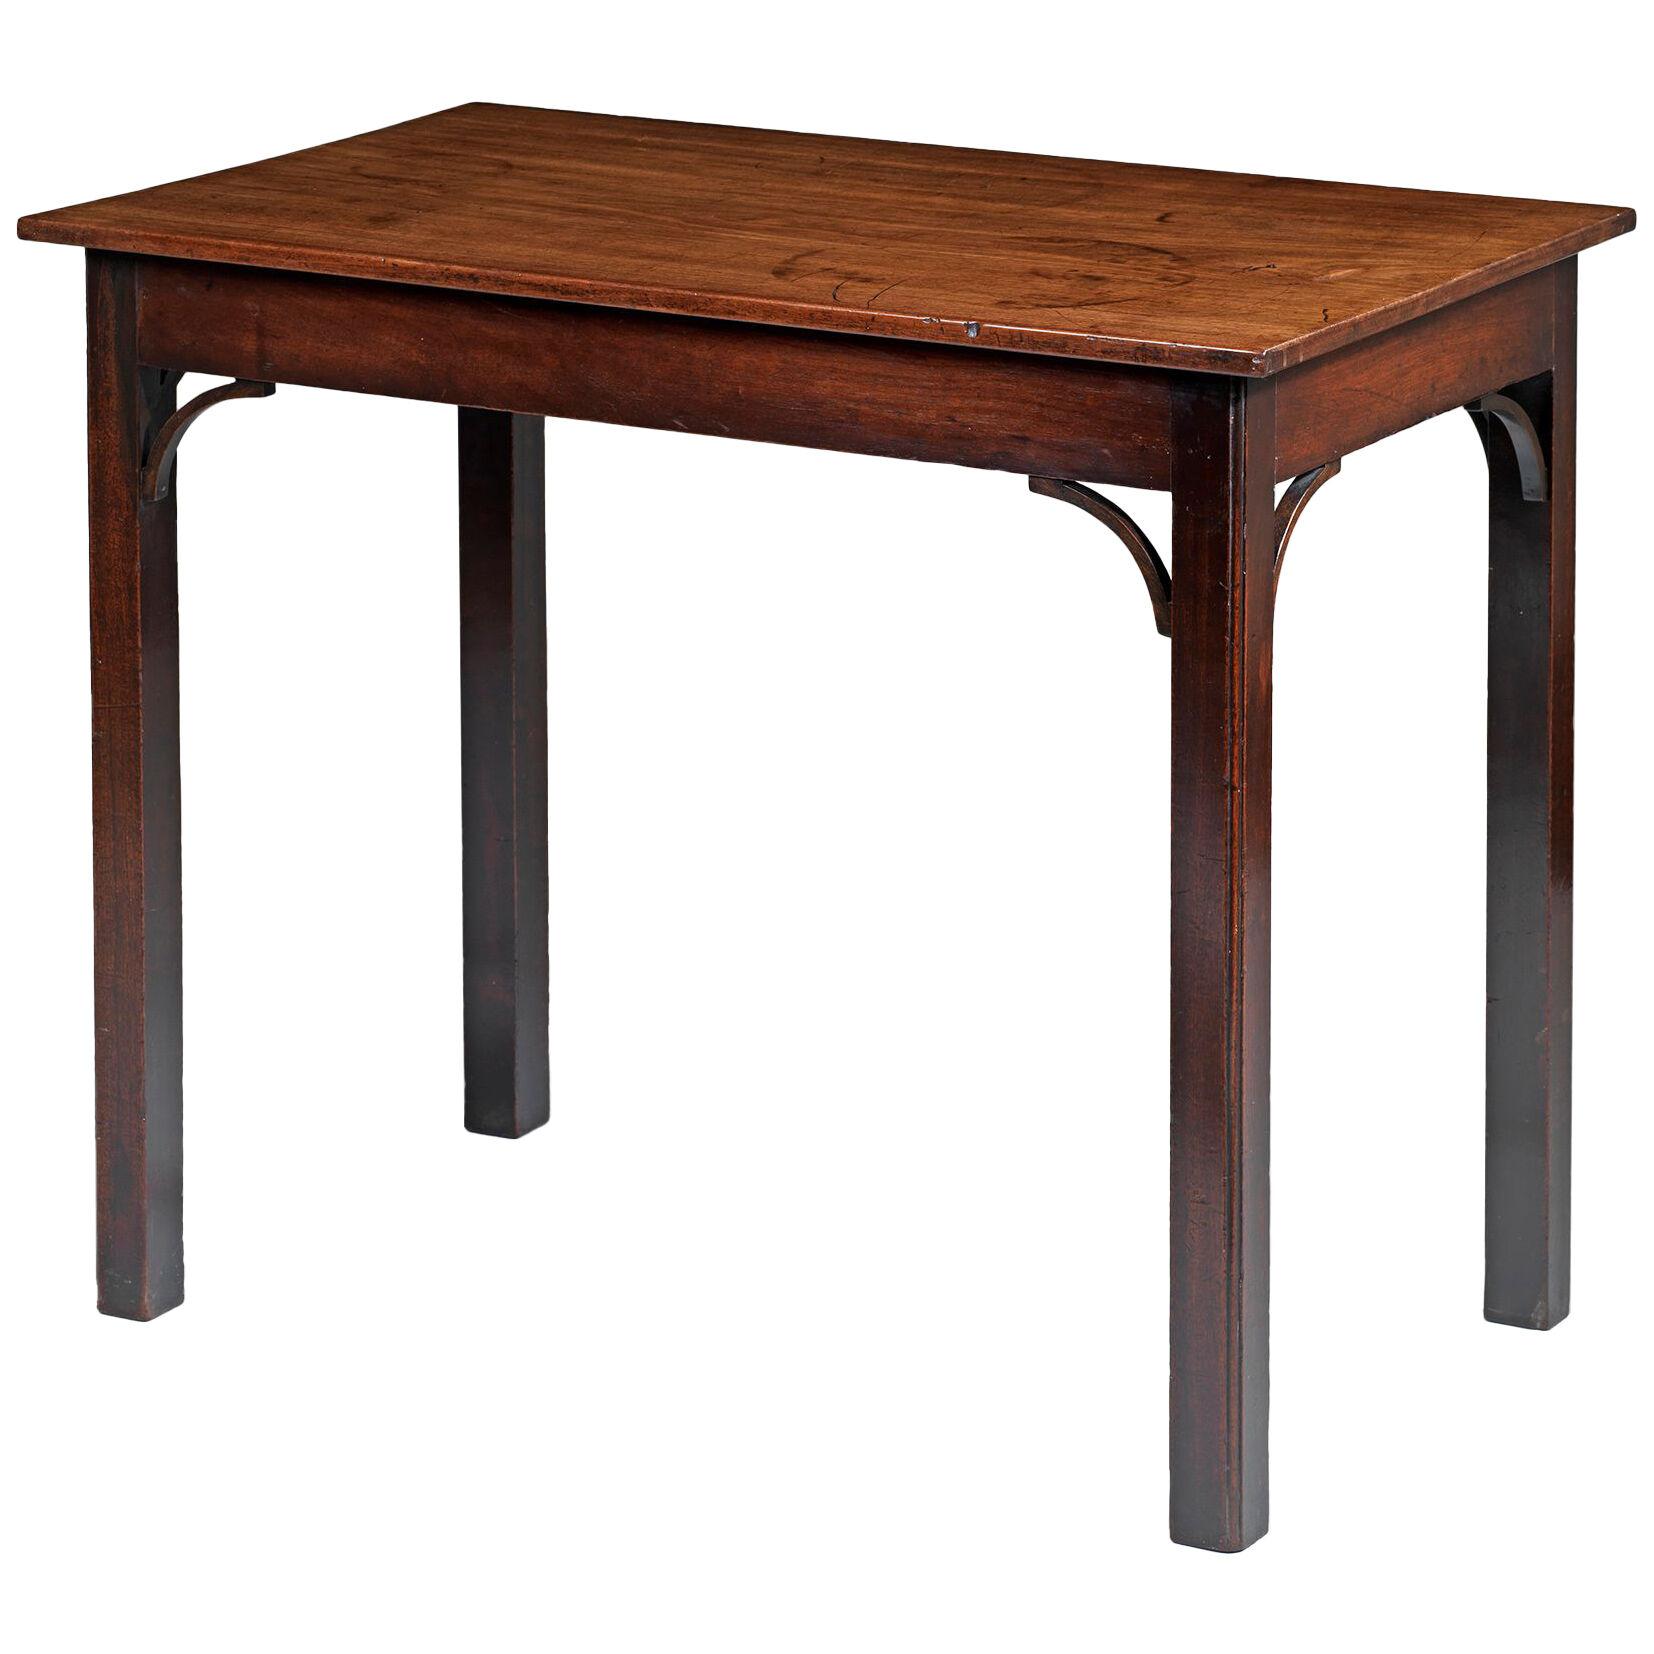 Chippendale period mahogany centre table